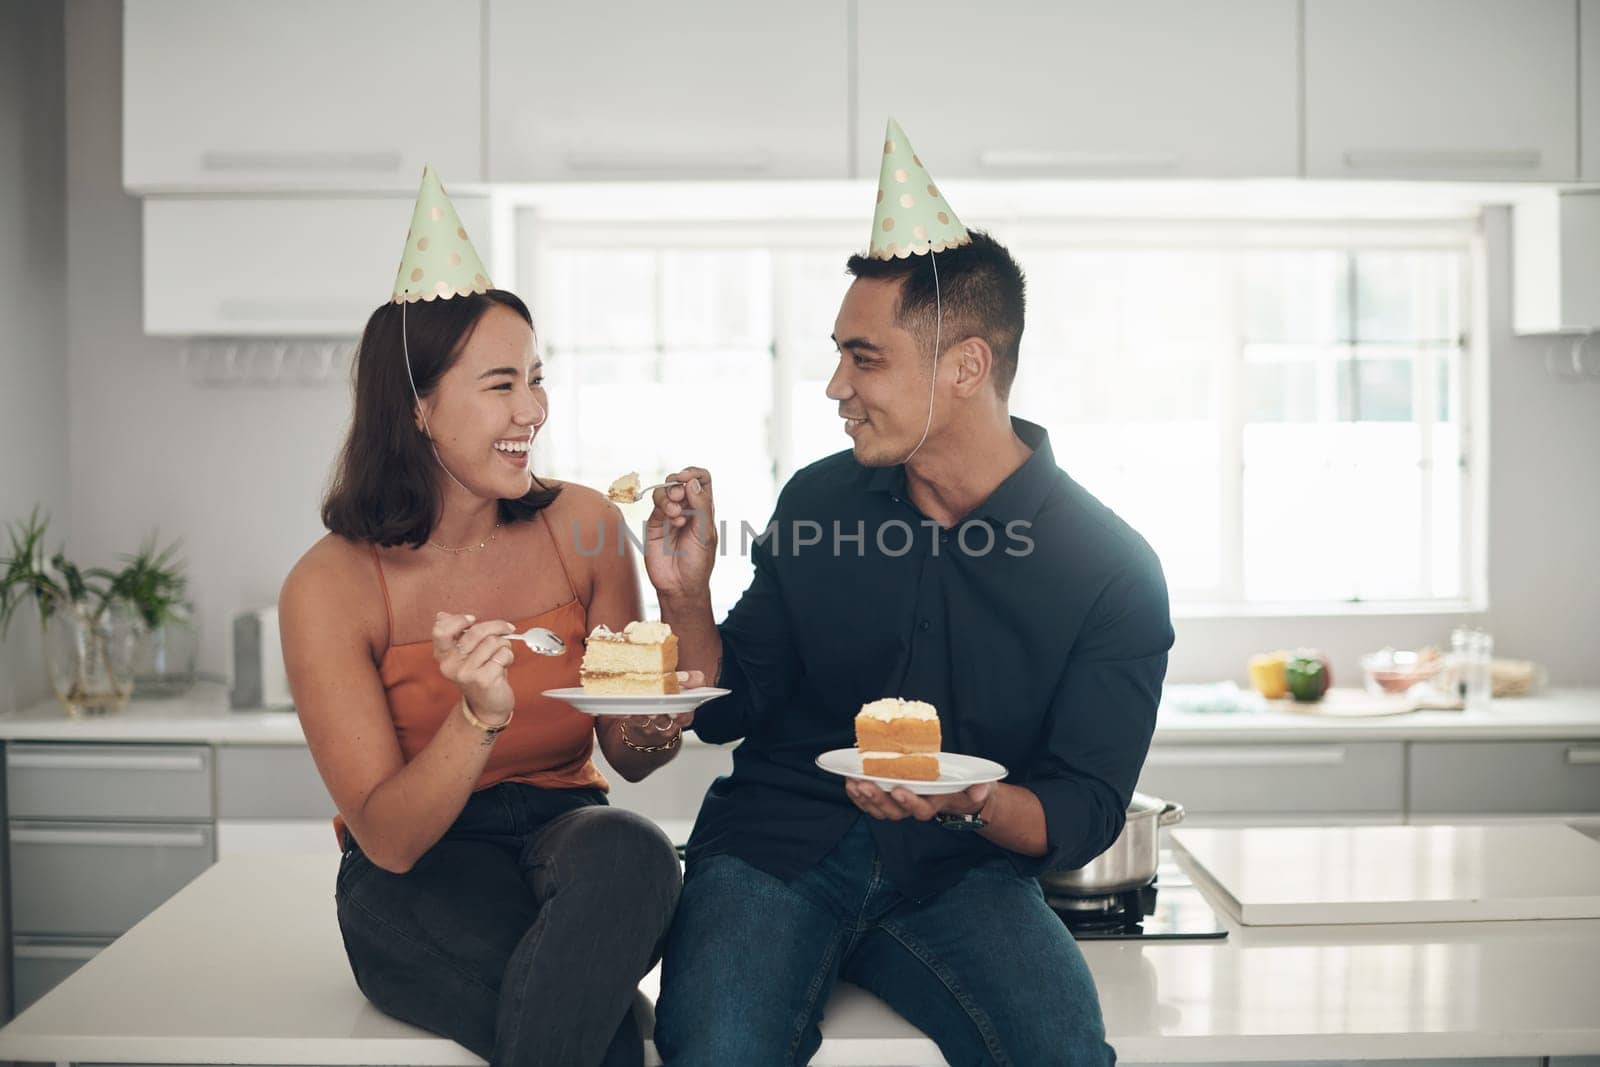 Birthday cake, celebration and couple in a kitchen, happy and relax while bonding in their home, smile and laugh. Party, people and man with woman on counter for eating, fun and celebrating in Japan.